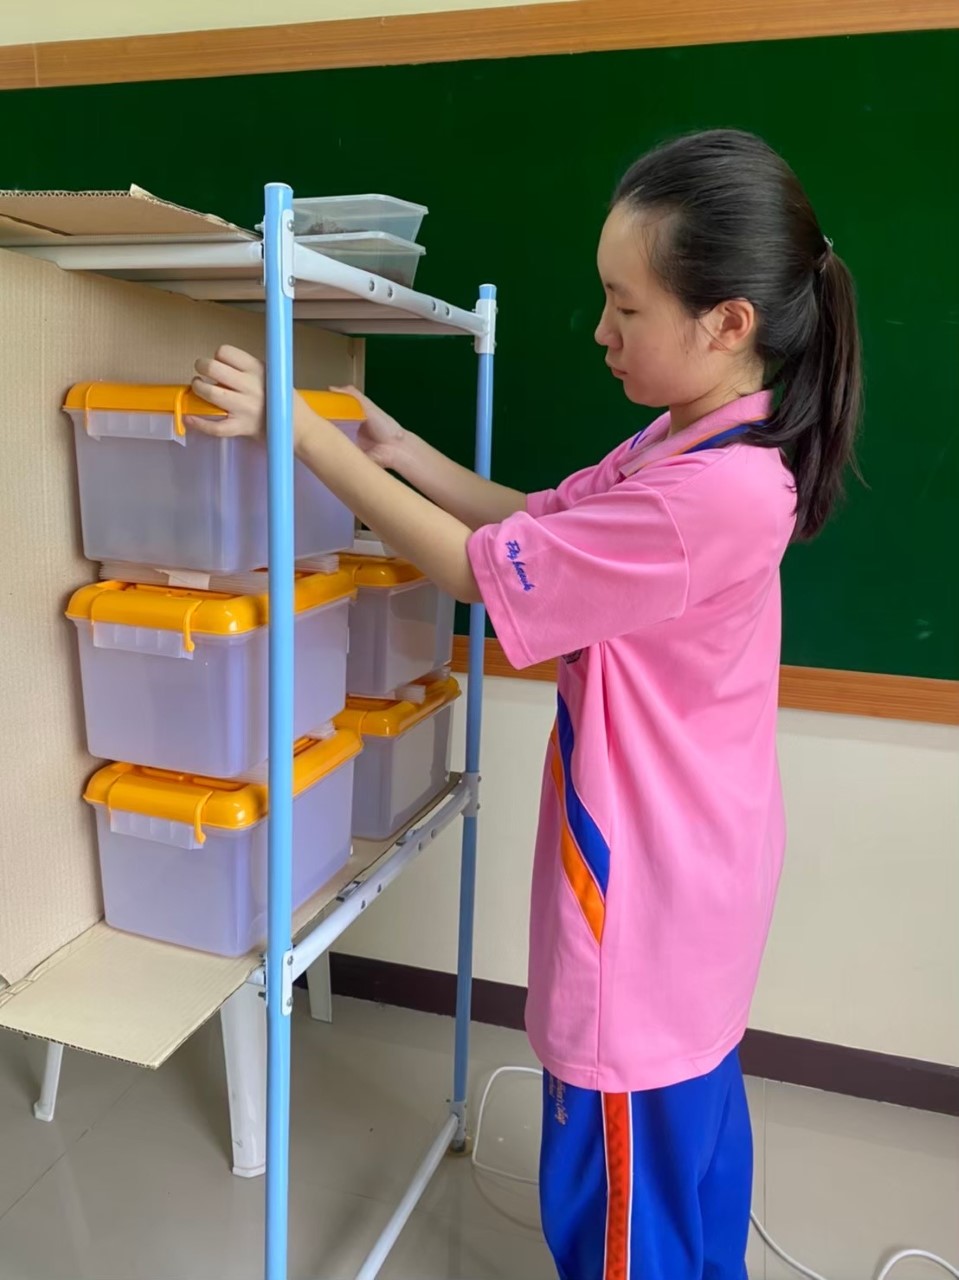 a girl wearing a pink shirt arranges a stack of plastic bins on a shelf